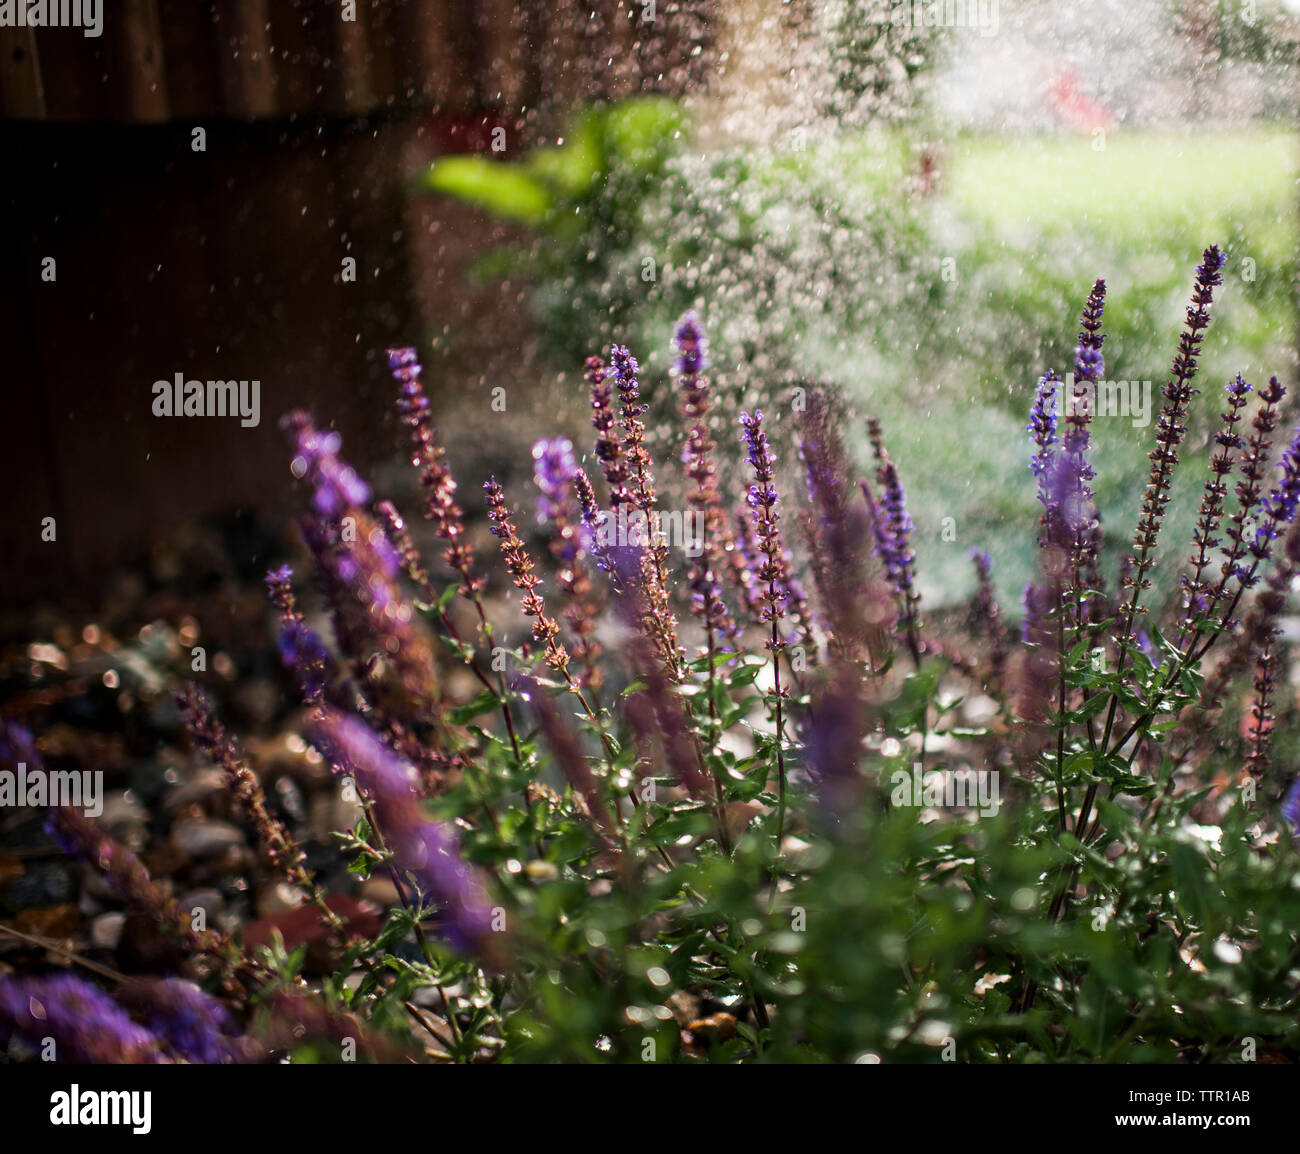 Close-up of water being sprayed on flowers at garden Stock Photo